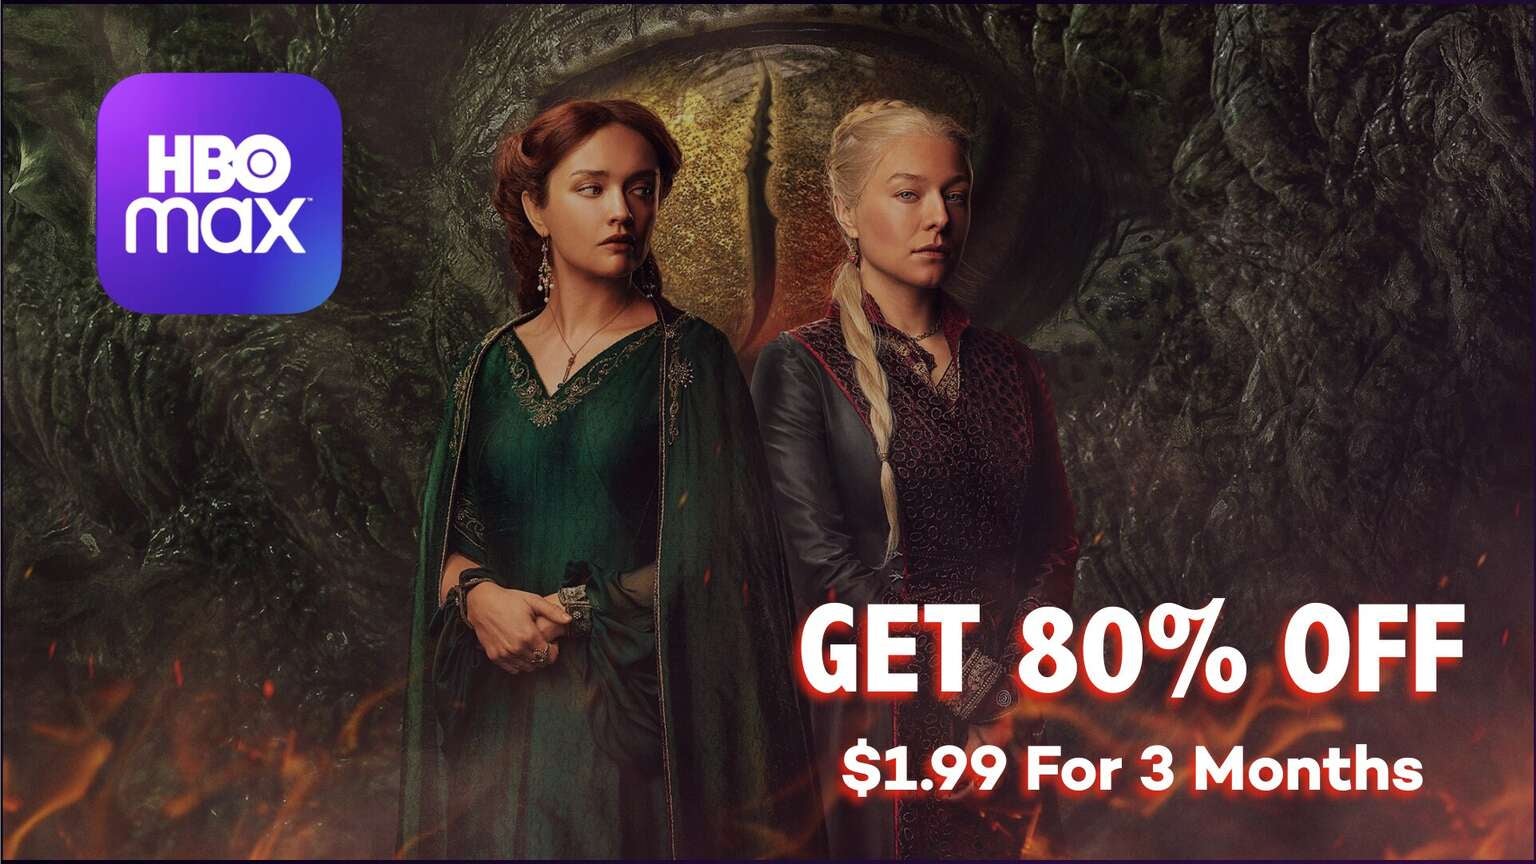 HBO Max Black Friday Deal Get HBO Max for Just 1.99 per Month for